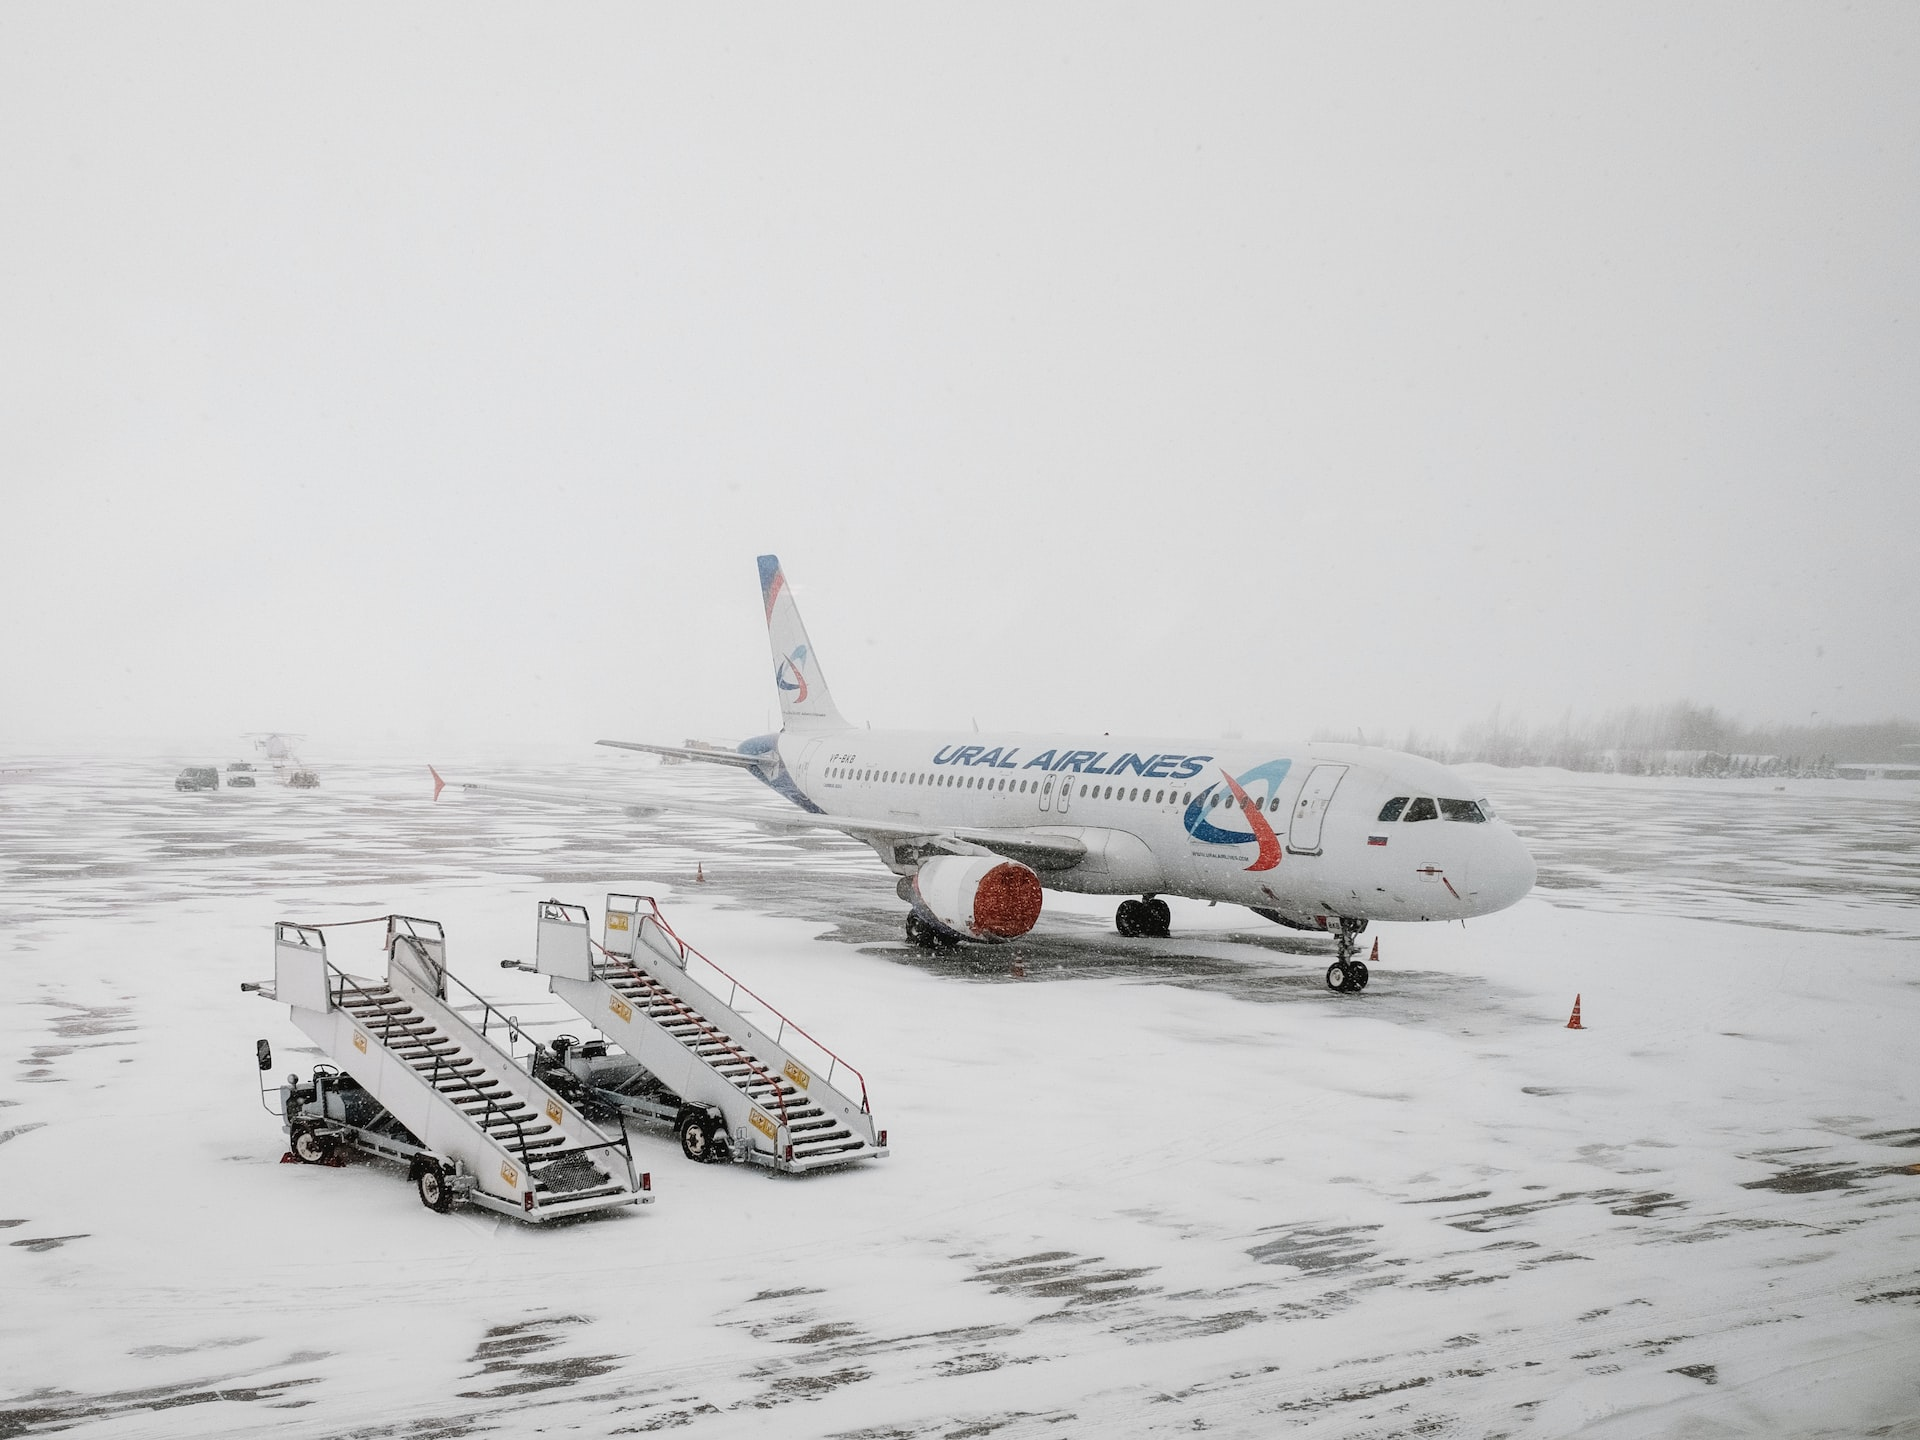 Types of fog: An aircraft stationed on tarmac in freezing fog.